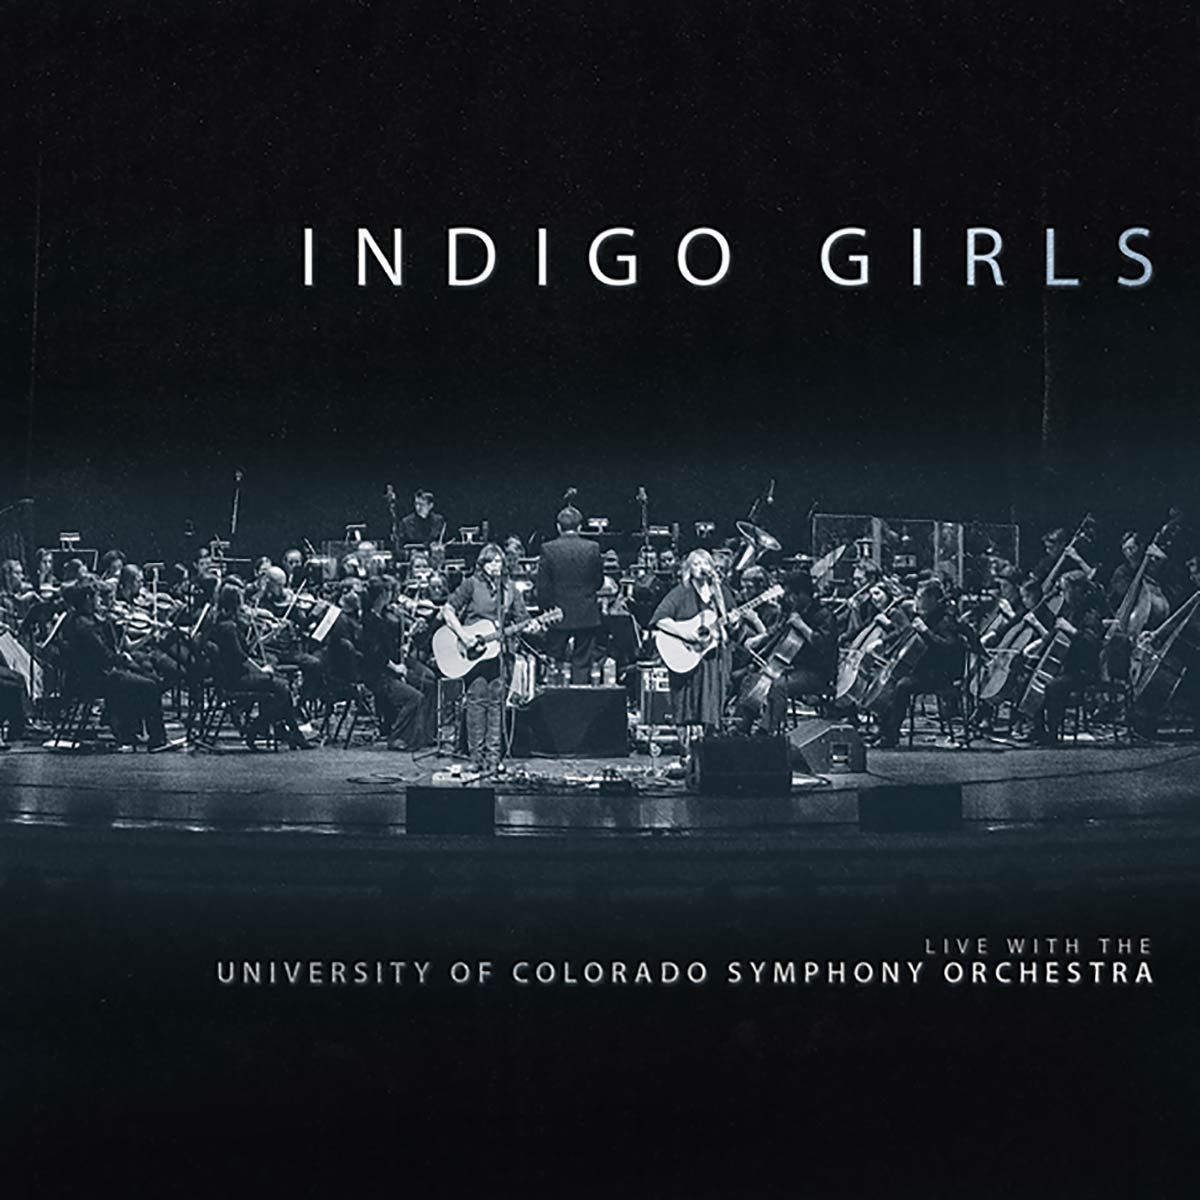 Live With The University of Colorado Symphony Orchestra